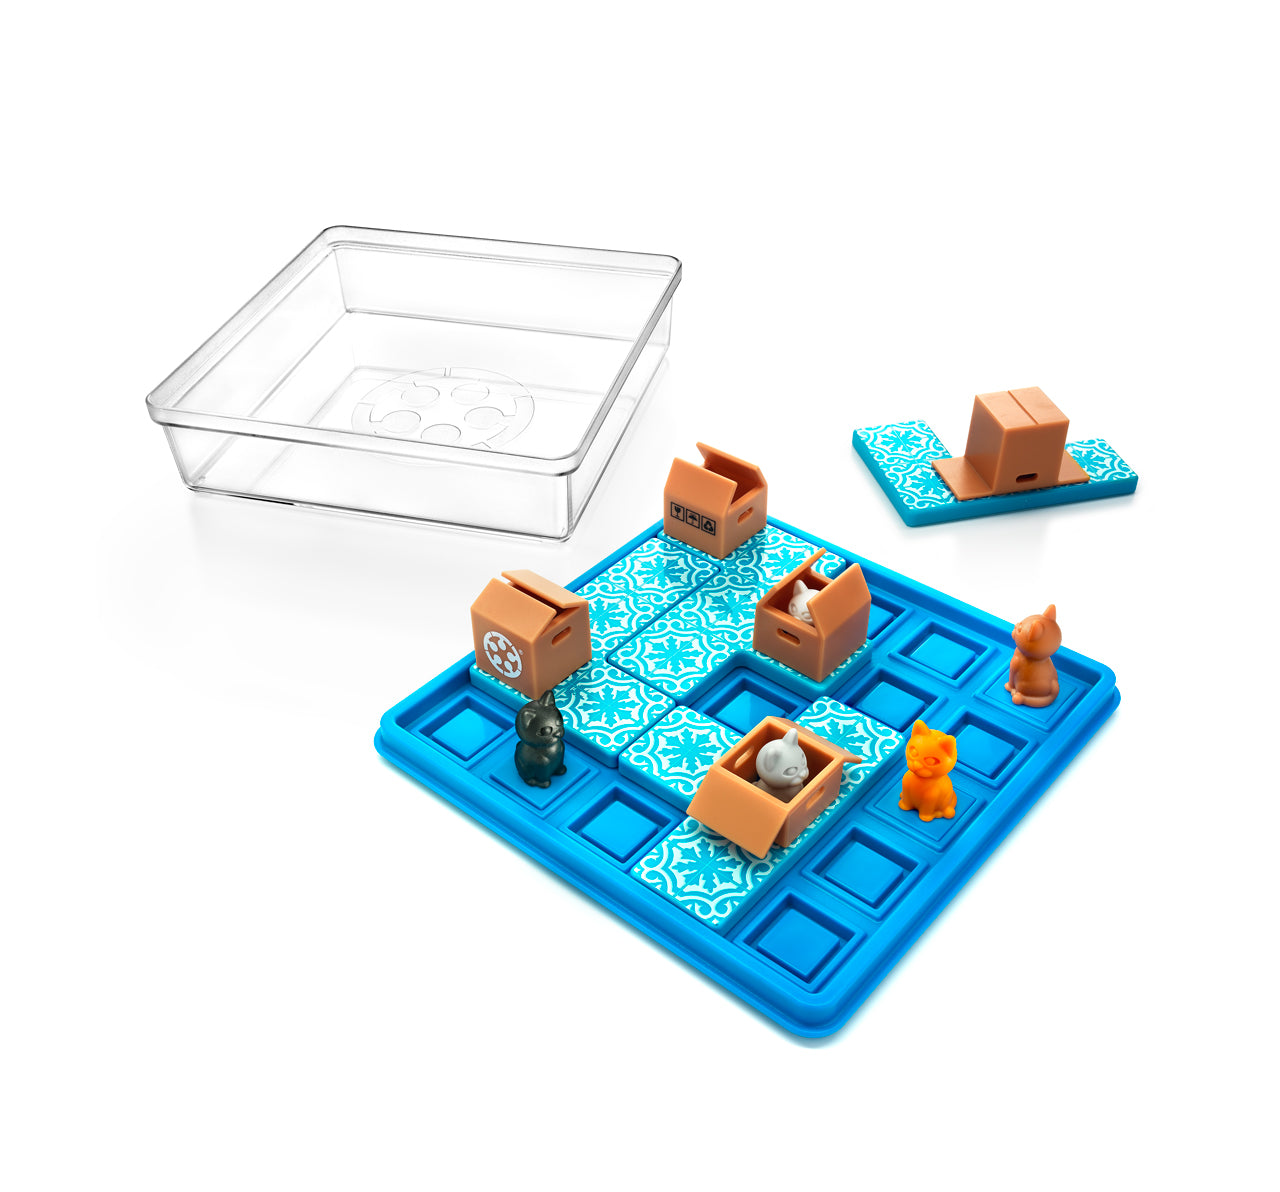 Photo of parts of Cats and Boxes by Smart Games.